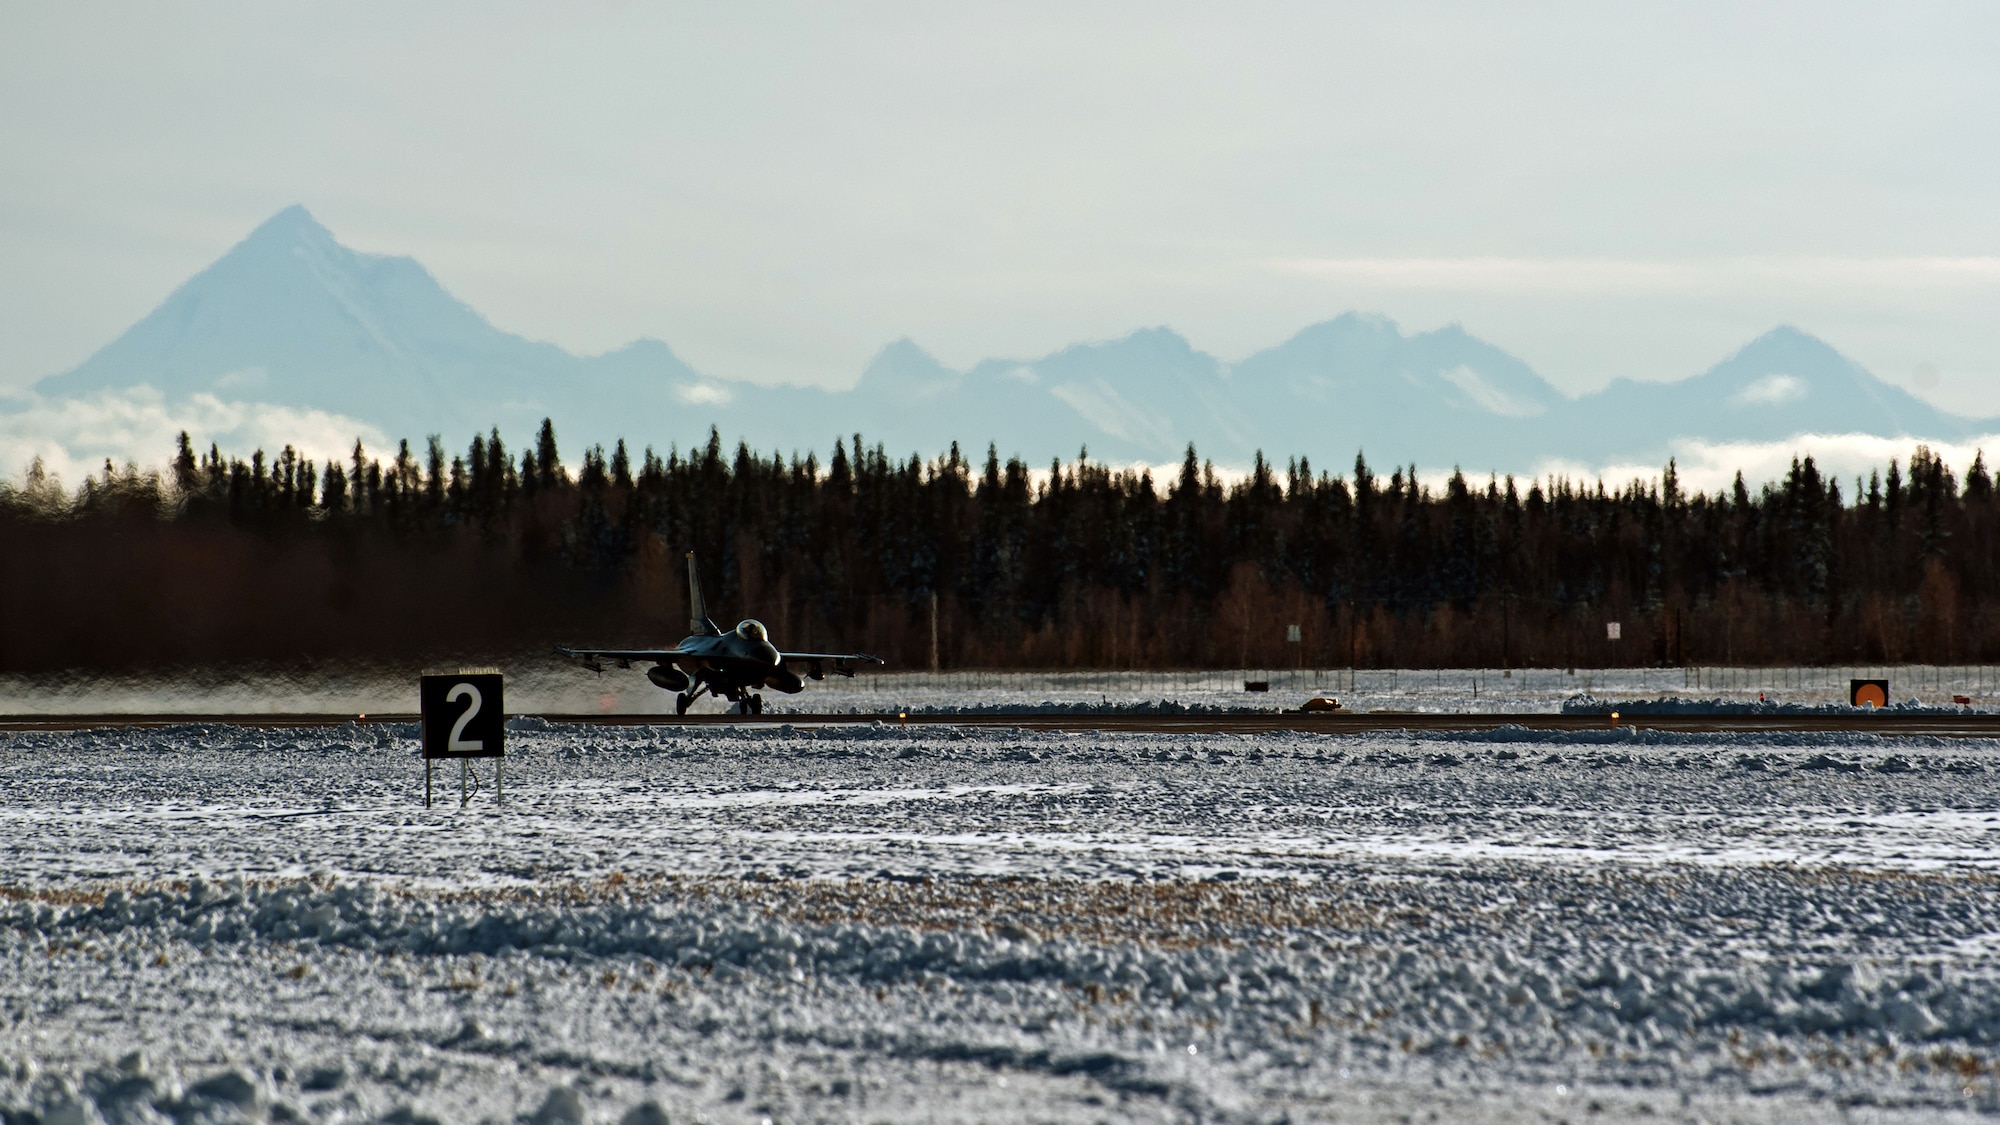 An F-16 Fighting Falcon takes off during Red Flag-Alaska 15-1 Oct. 10, 2014, at Eielson Air Force Base, Alaska. The Pacific Air Forces field training exercise focused on improving combat readiness of U.S. and international forces flown under simulated air combat conditions to prepare for realistic threats. The F-16 is from Kunsan Air Base, South Korea. (U.S. Air Force photo/Senior Airman Taylor Curry)